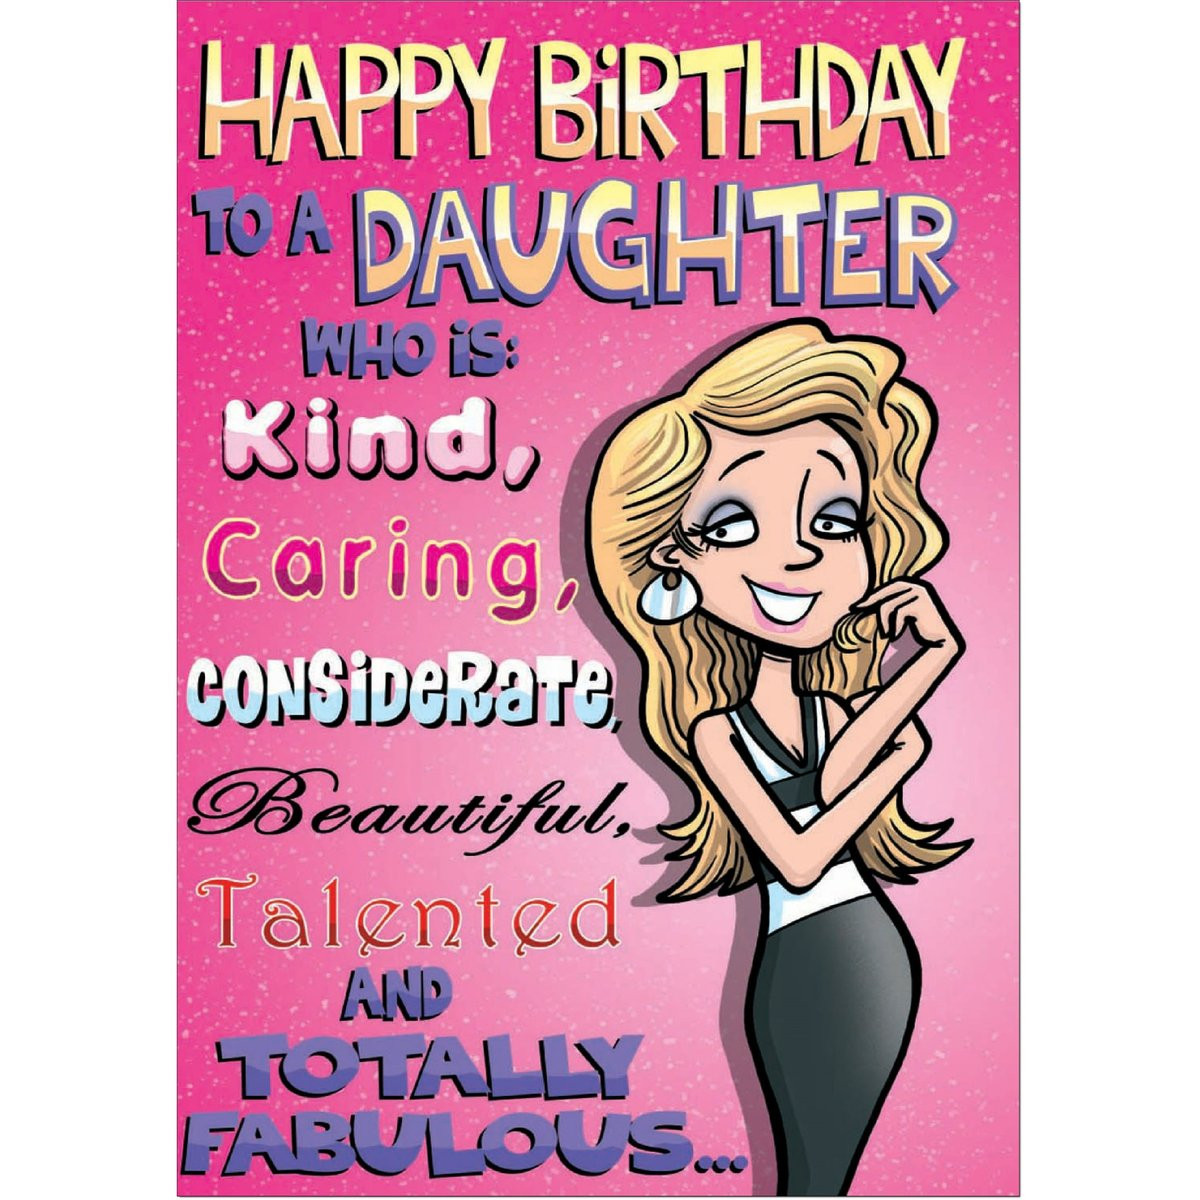 21 Best Funny Birthday Cards for Daughter Home, Family, Style and Art